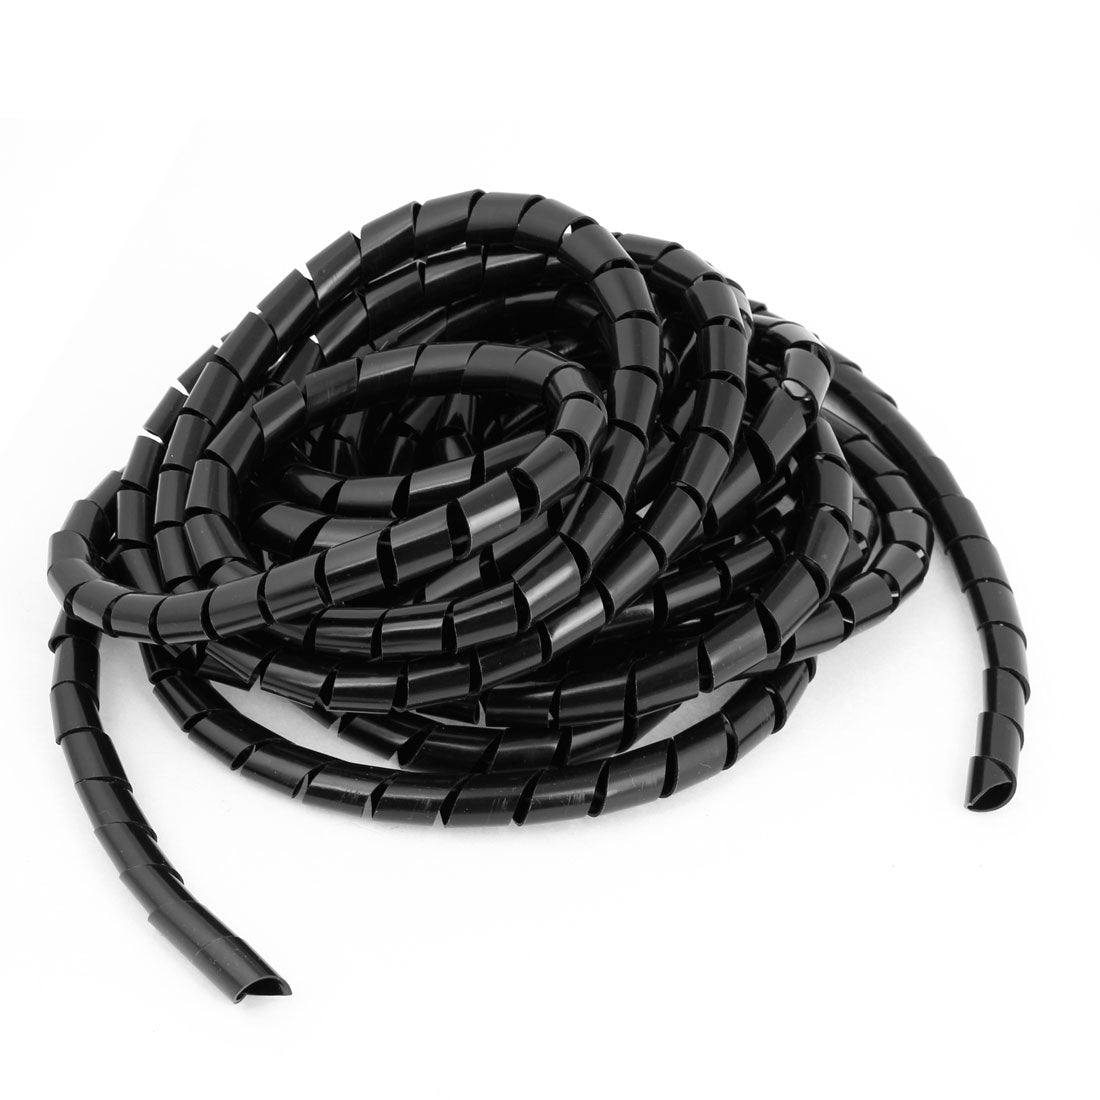 uxcell Uxcell 6M Long Flexible Black PE Polyethylene Spiral Cable Wire Wrap Tube 12mm